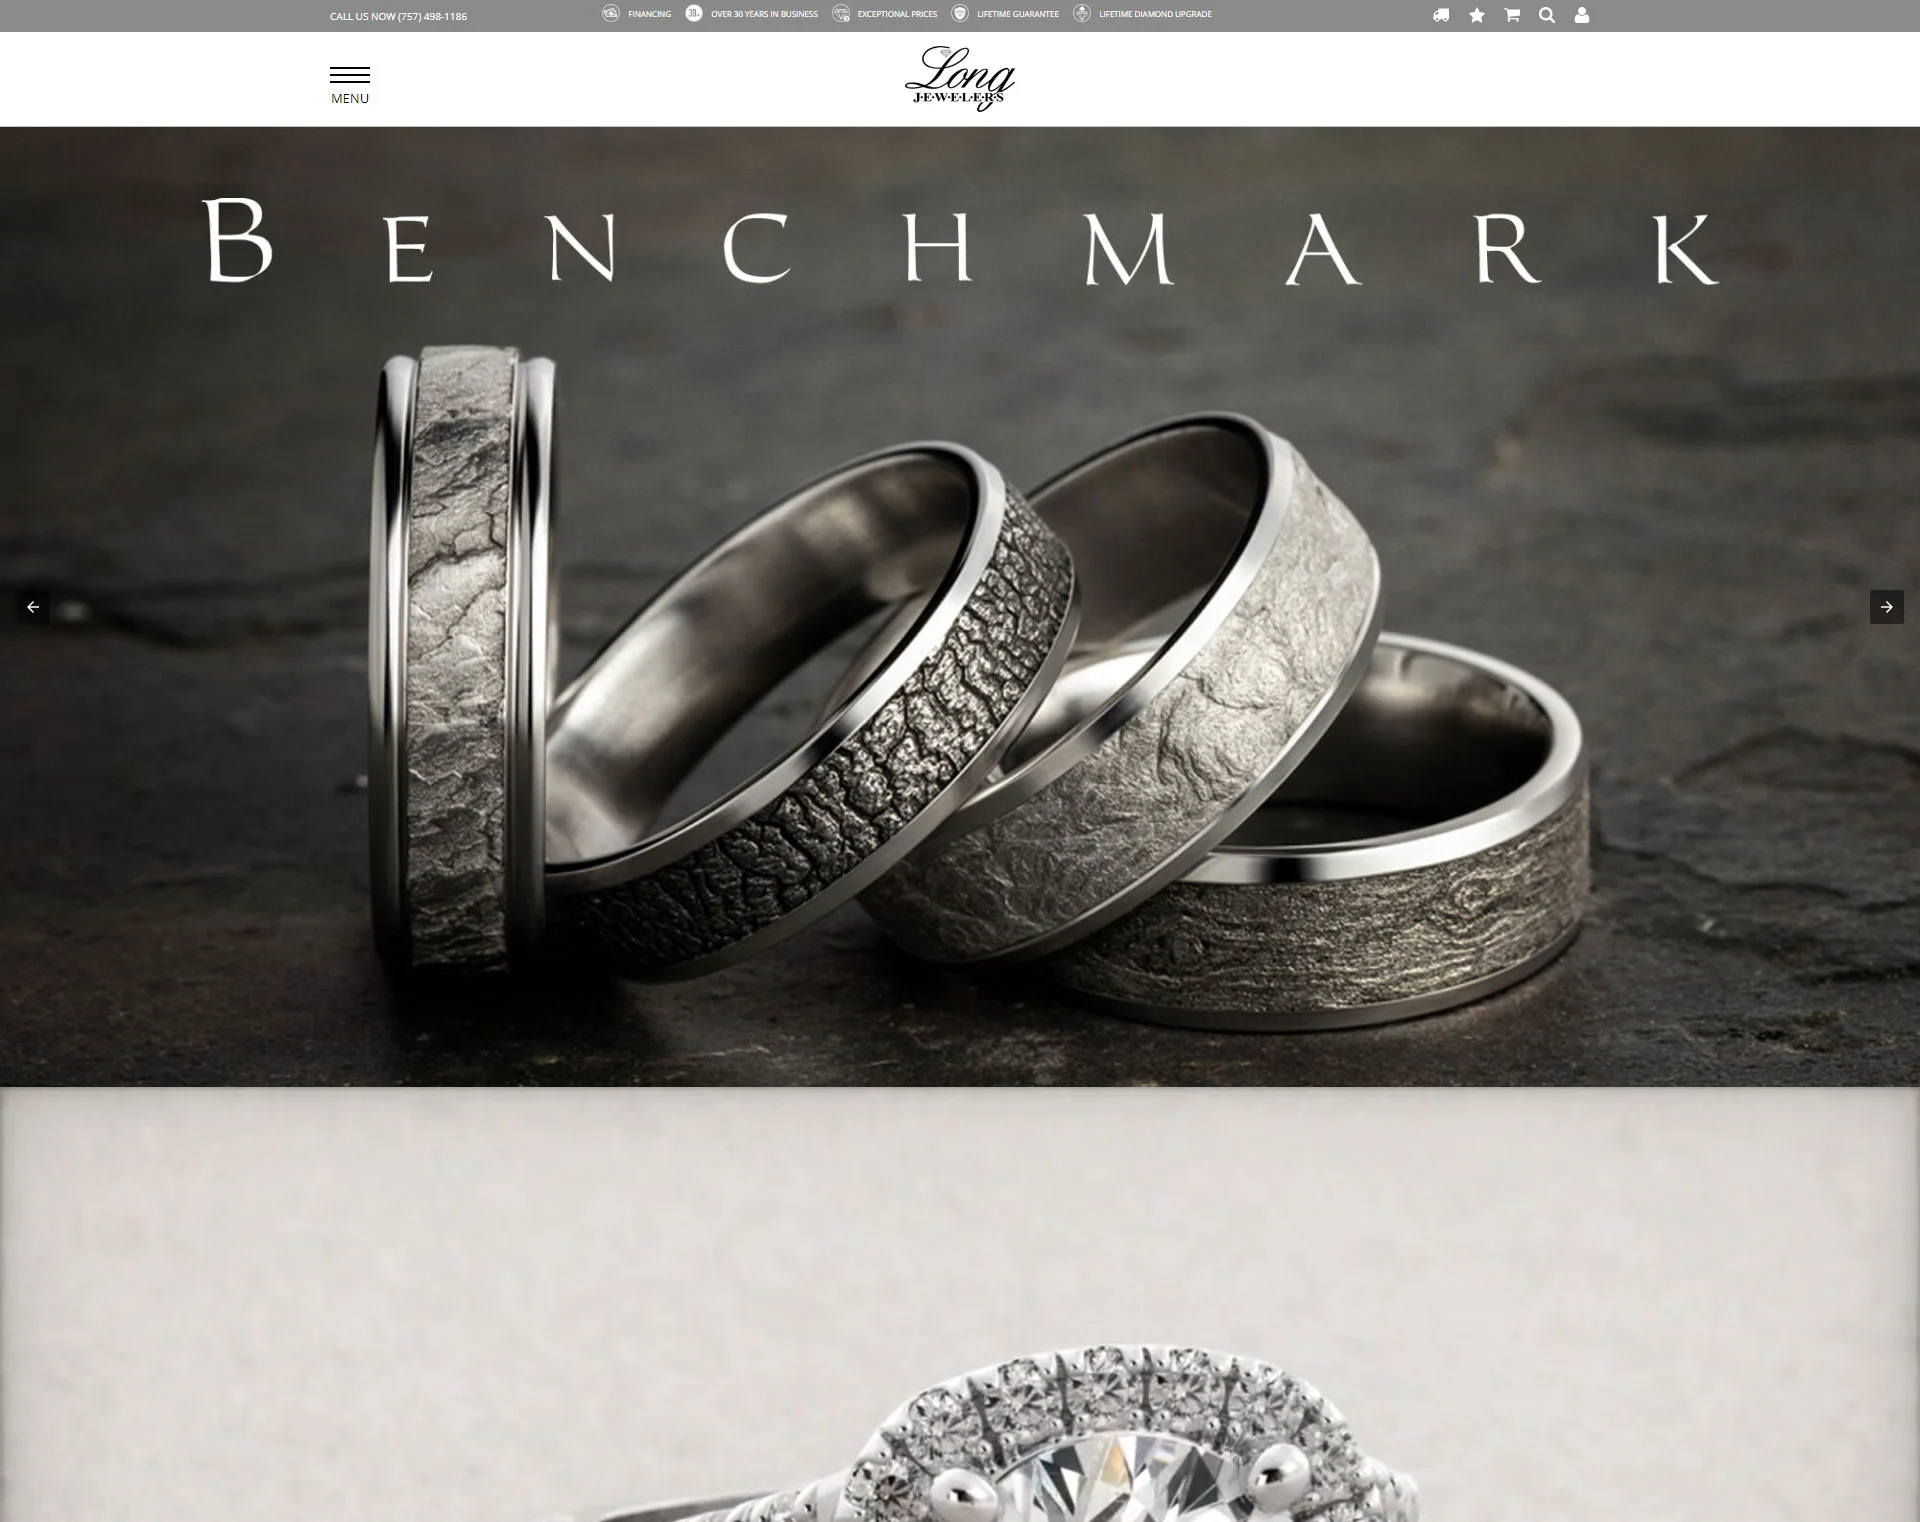 Long Jewelers - php development services